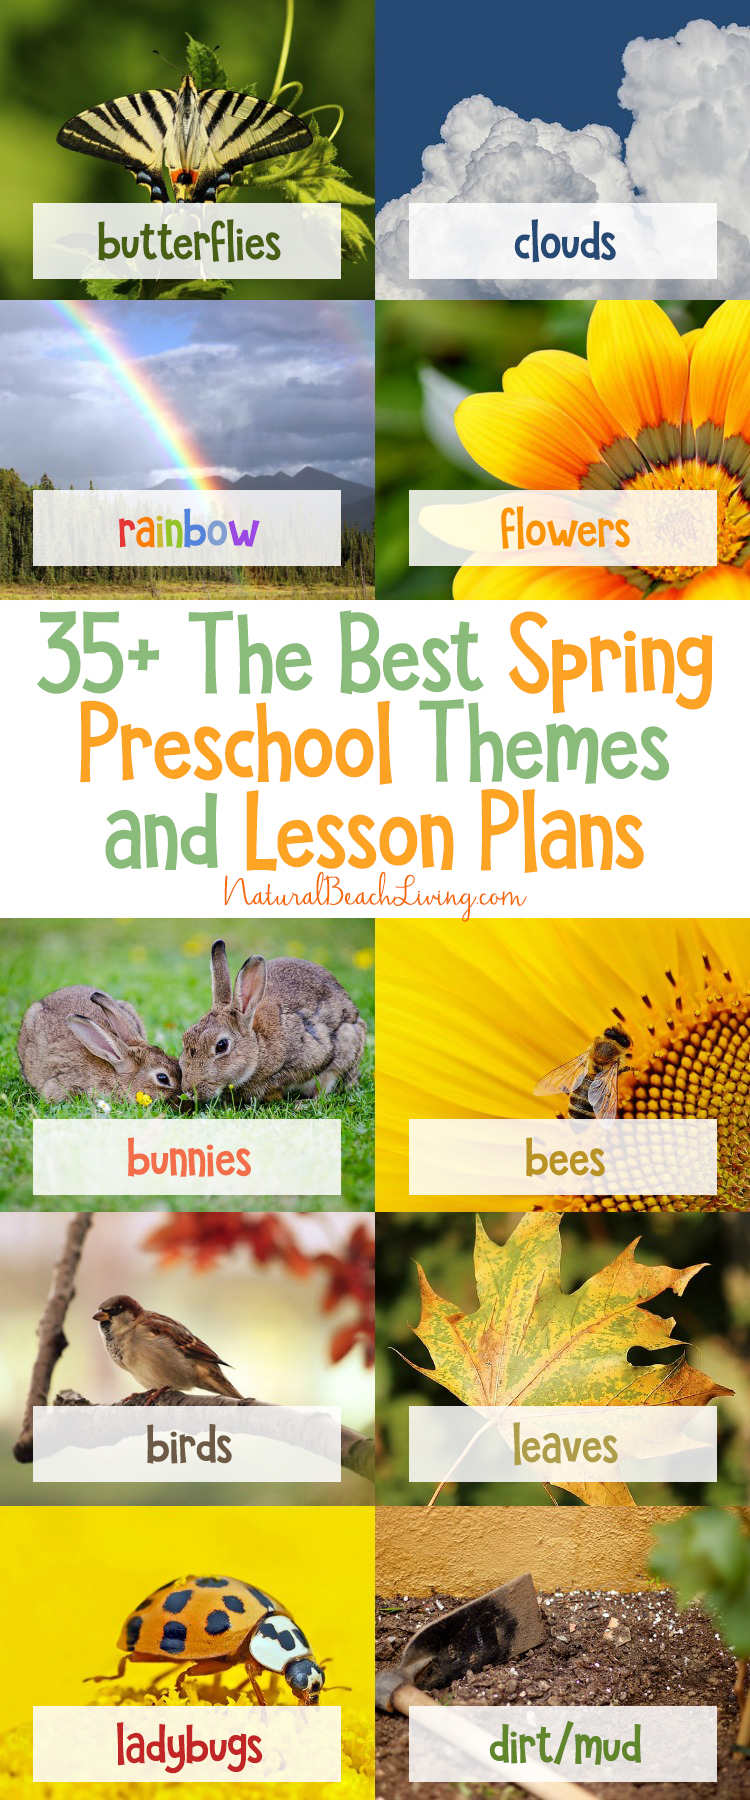 35+ The Best Spring Preschool Themes and Lesson Plans